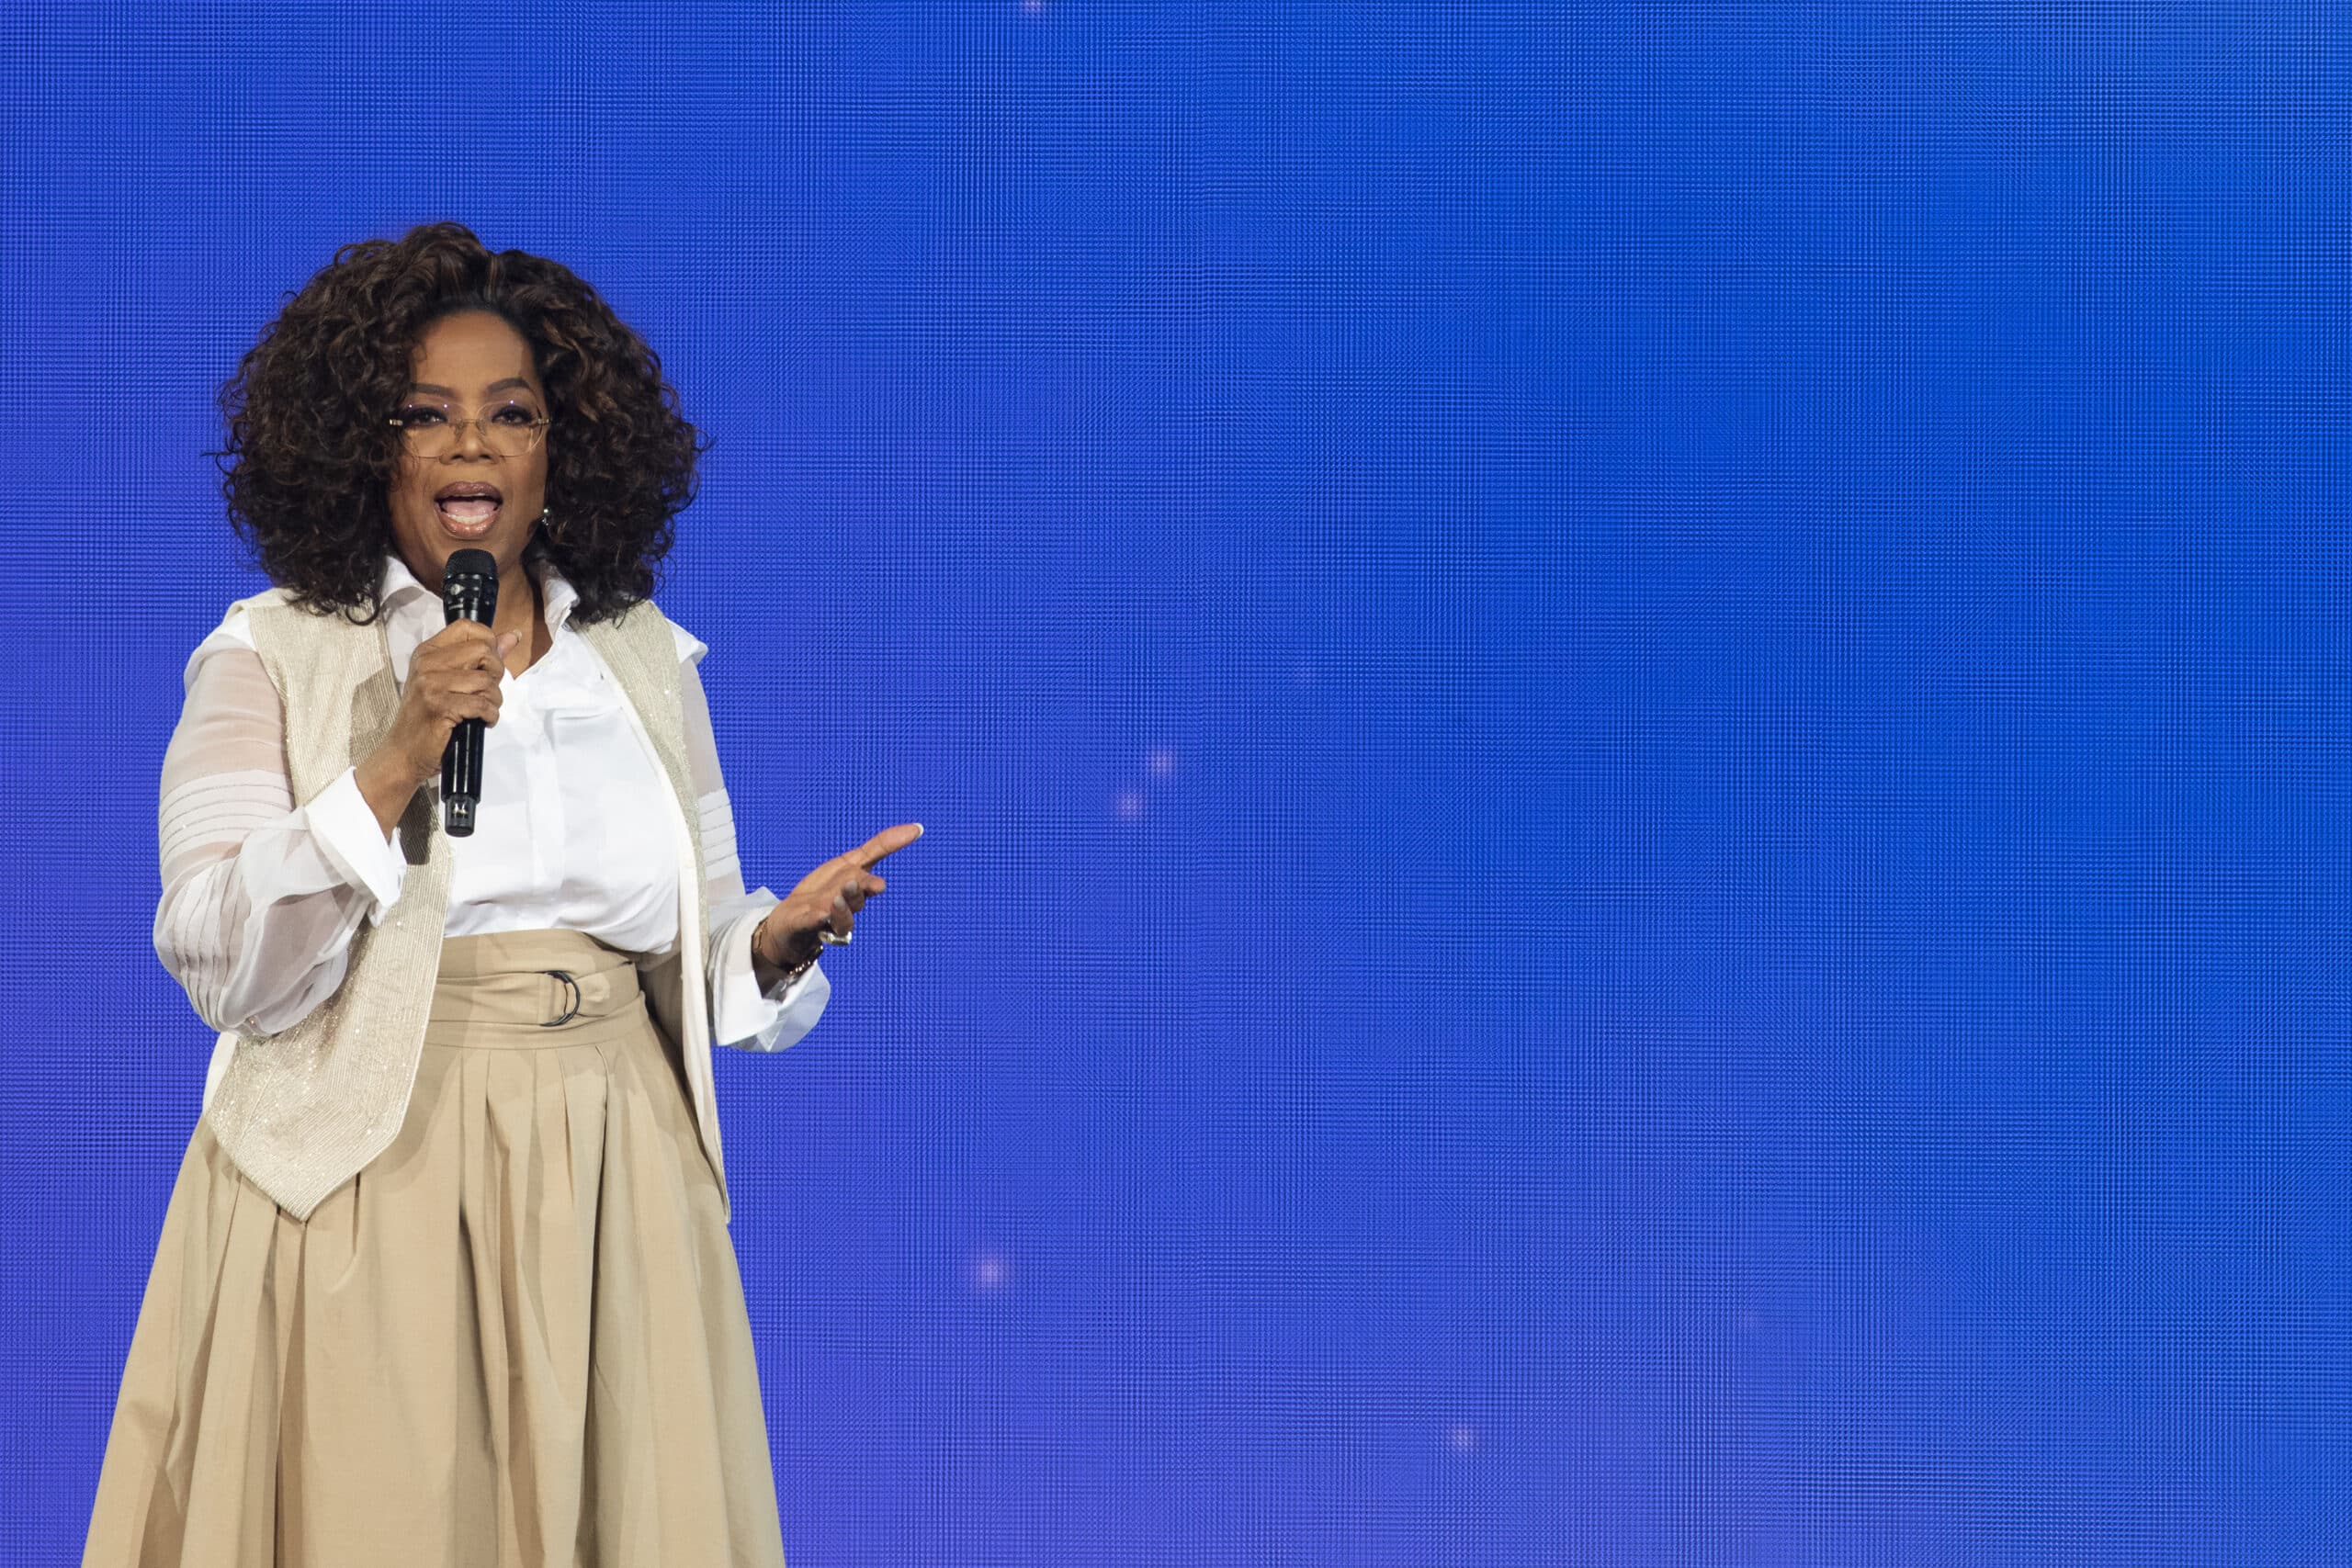 Opinion: America, stop criticizing Oprah for her success with